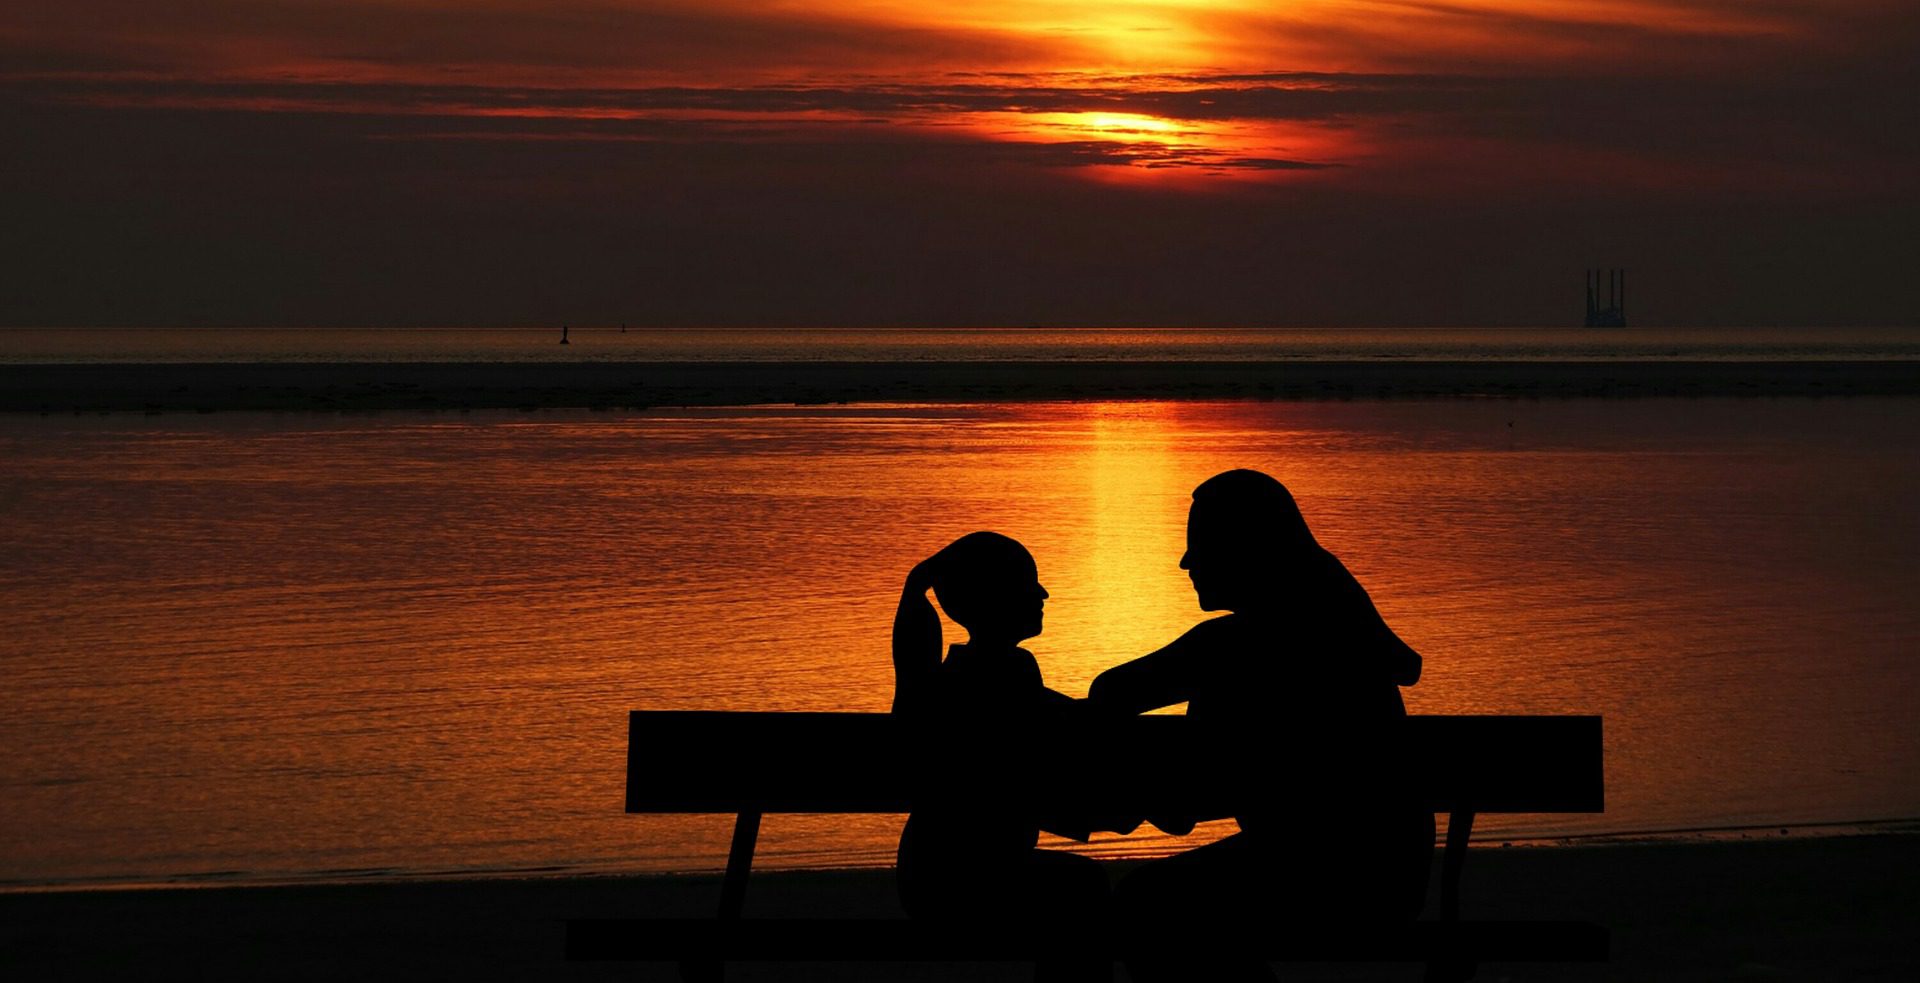 Two people sitting on a bench at sunset.